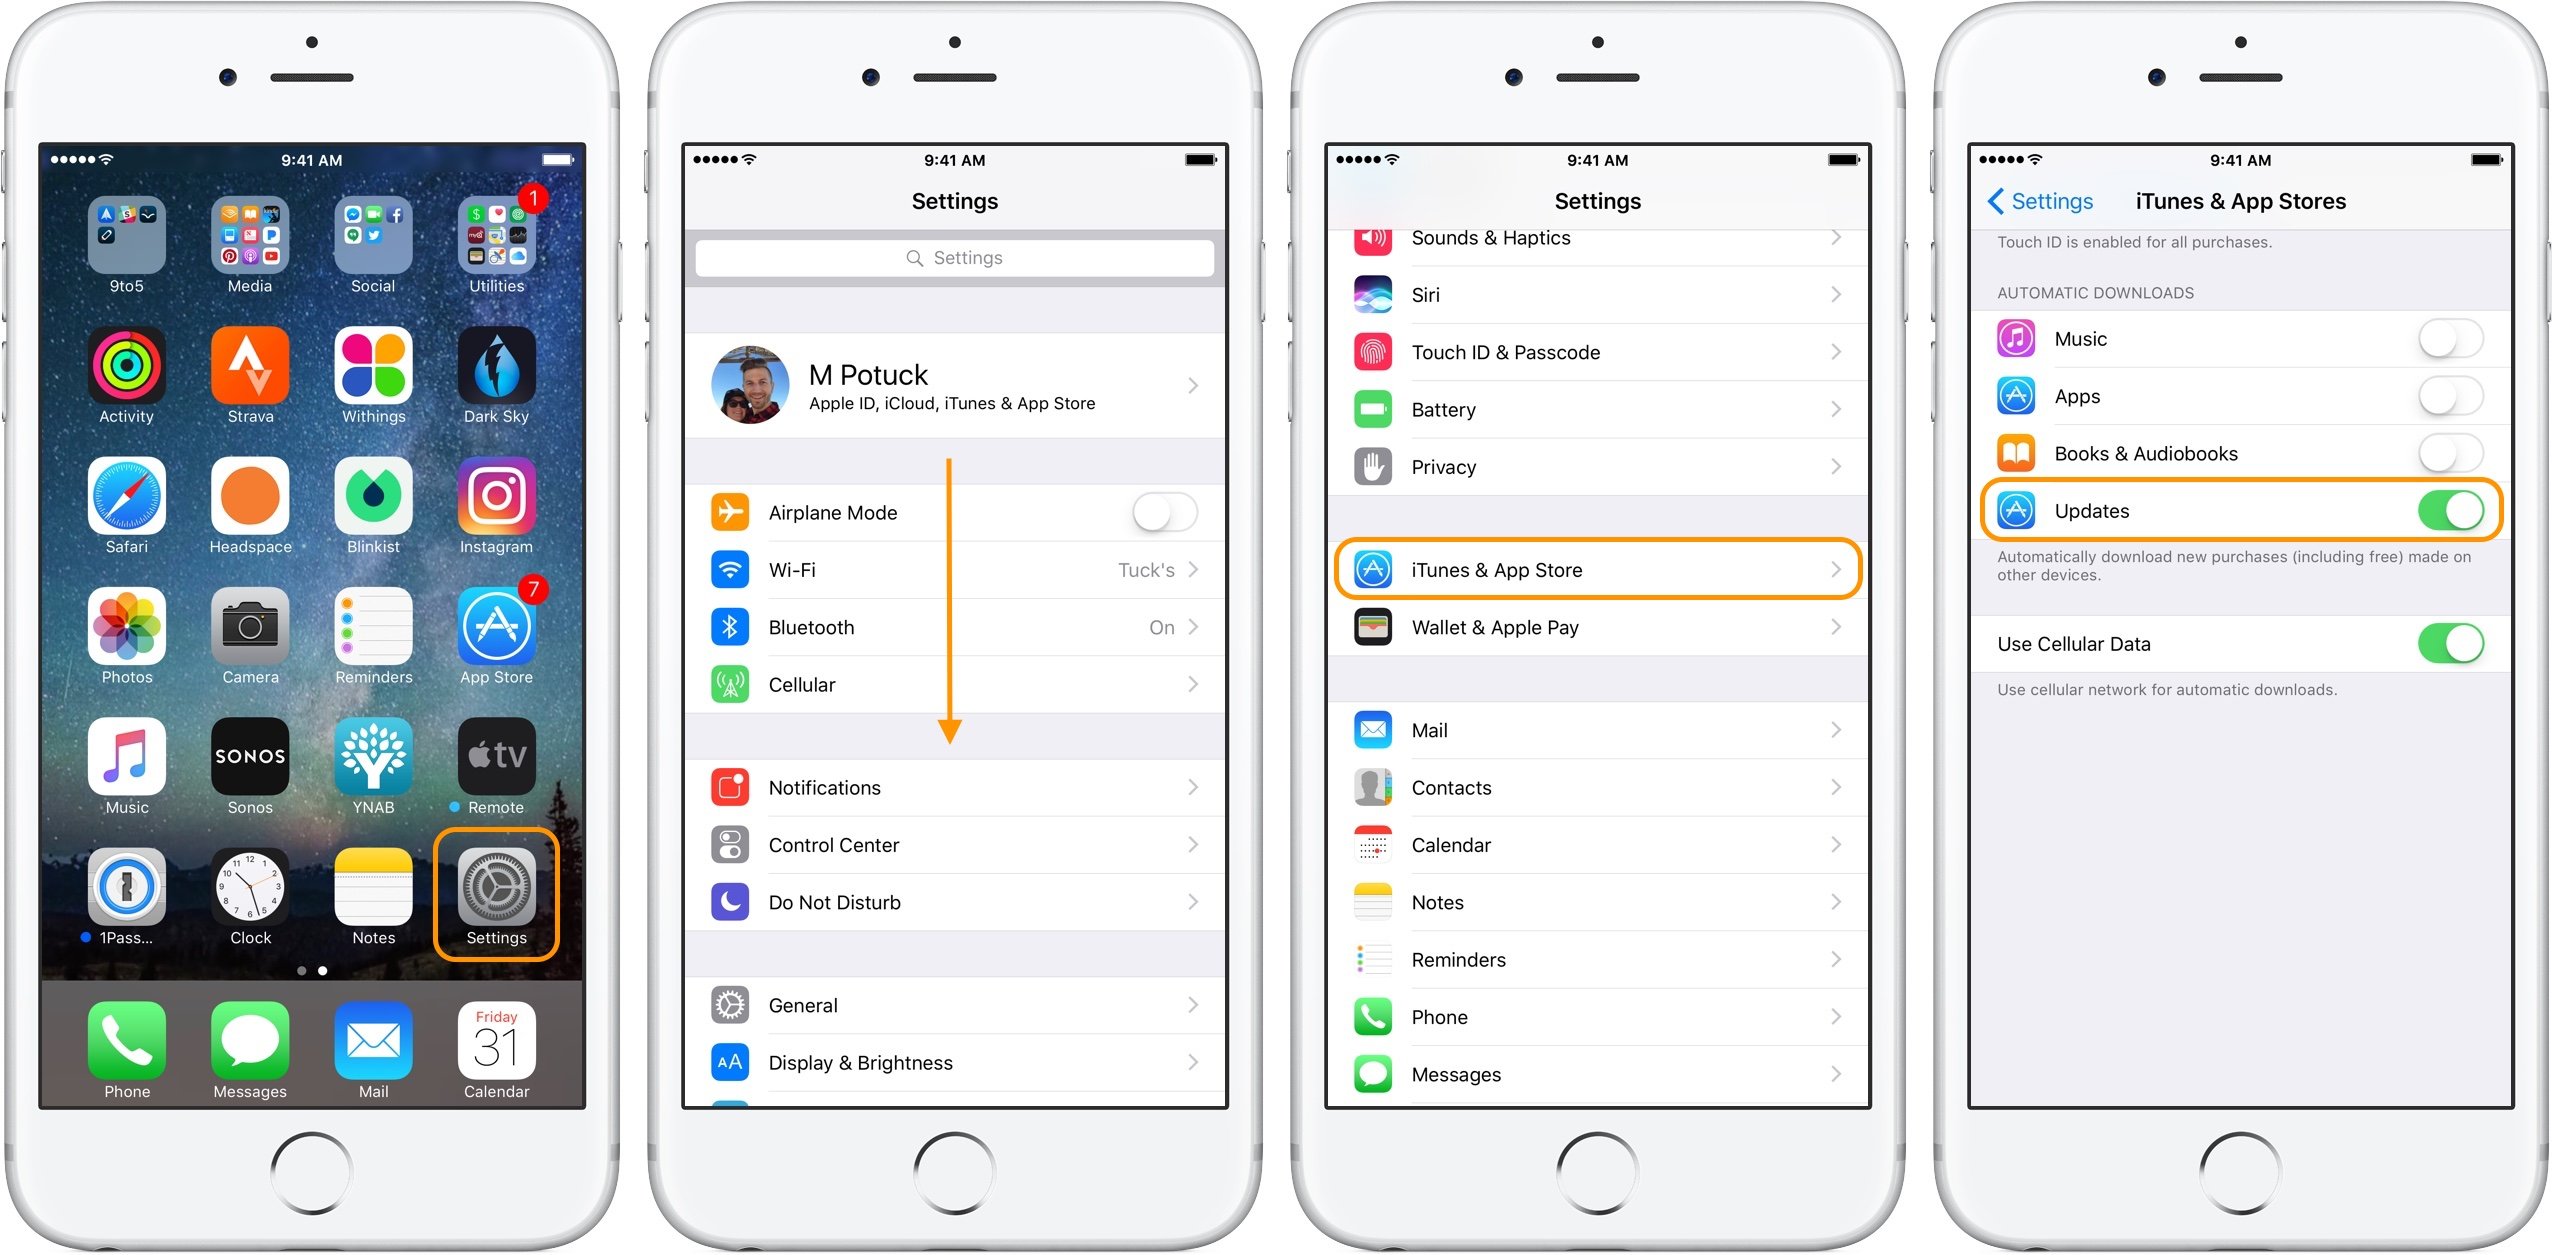 How to update software on iPhone and iPad